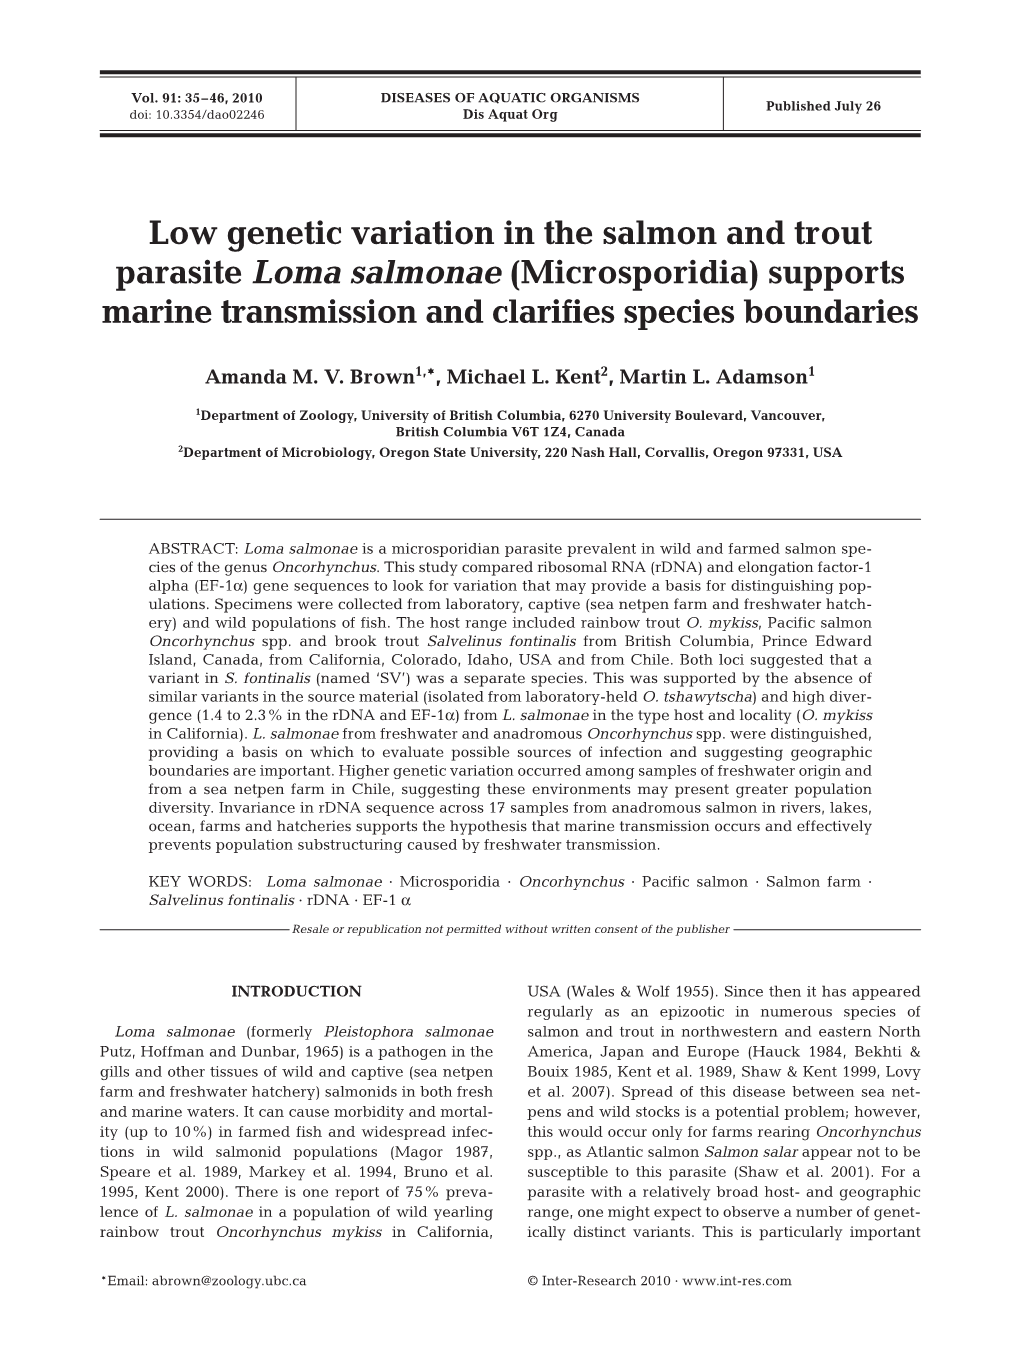 Low Genetic Variation in the Salmon and Trout Parasite Loma Salmonae (Microsporidia) Supports Marine Transmission and Clarifies Species Boundaries